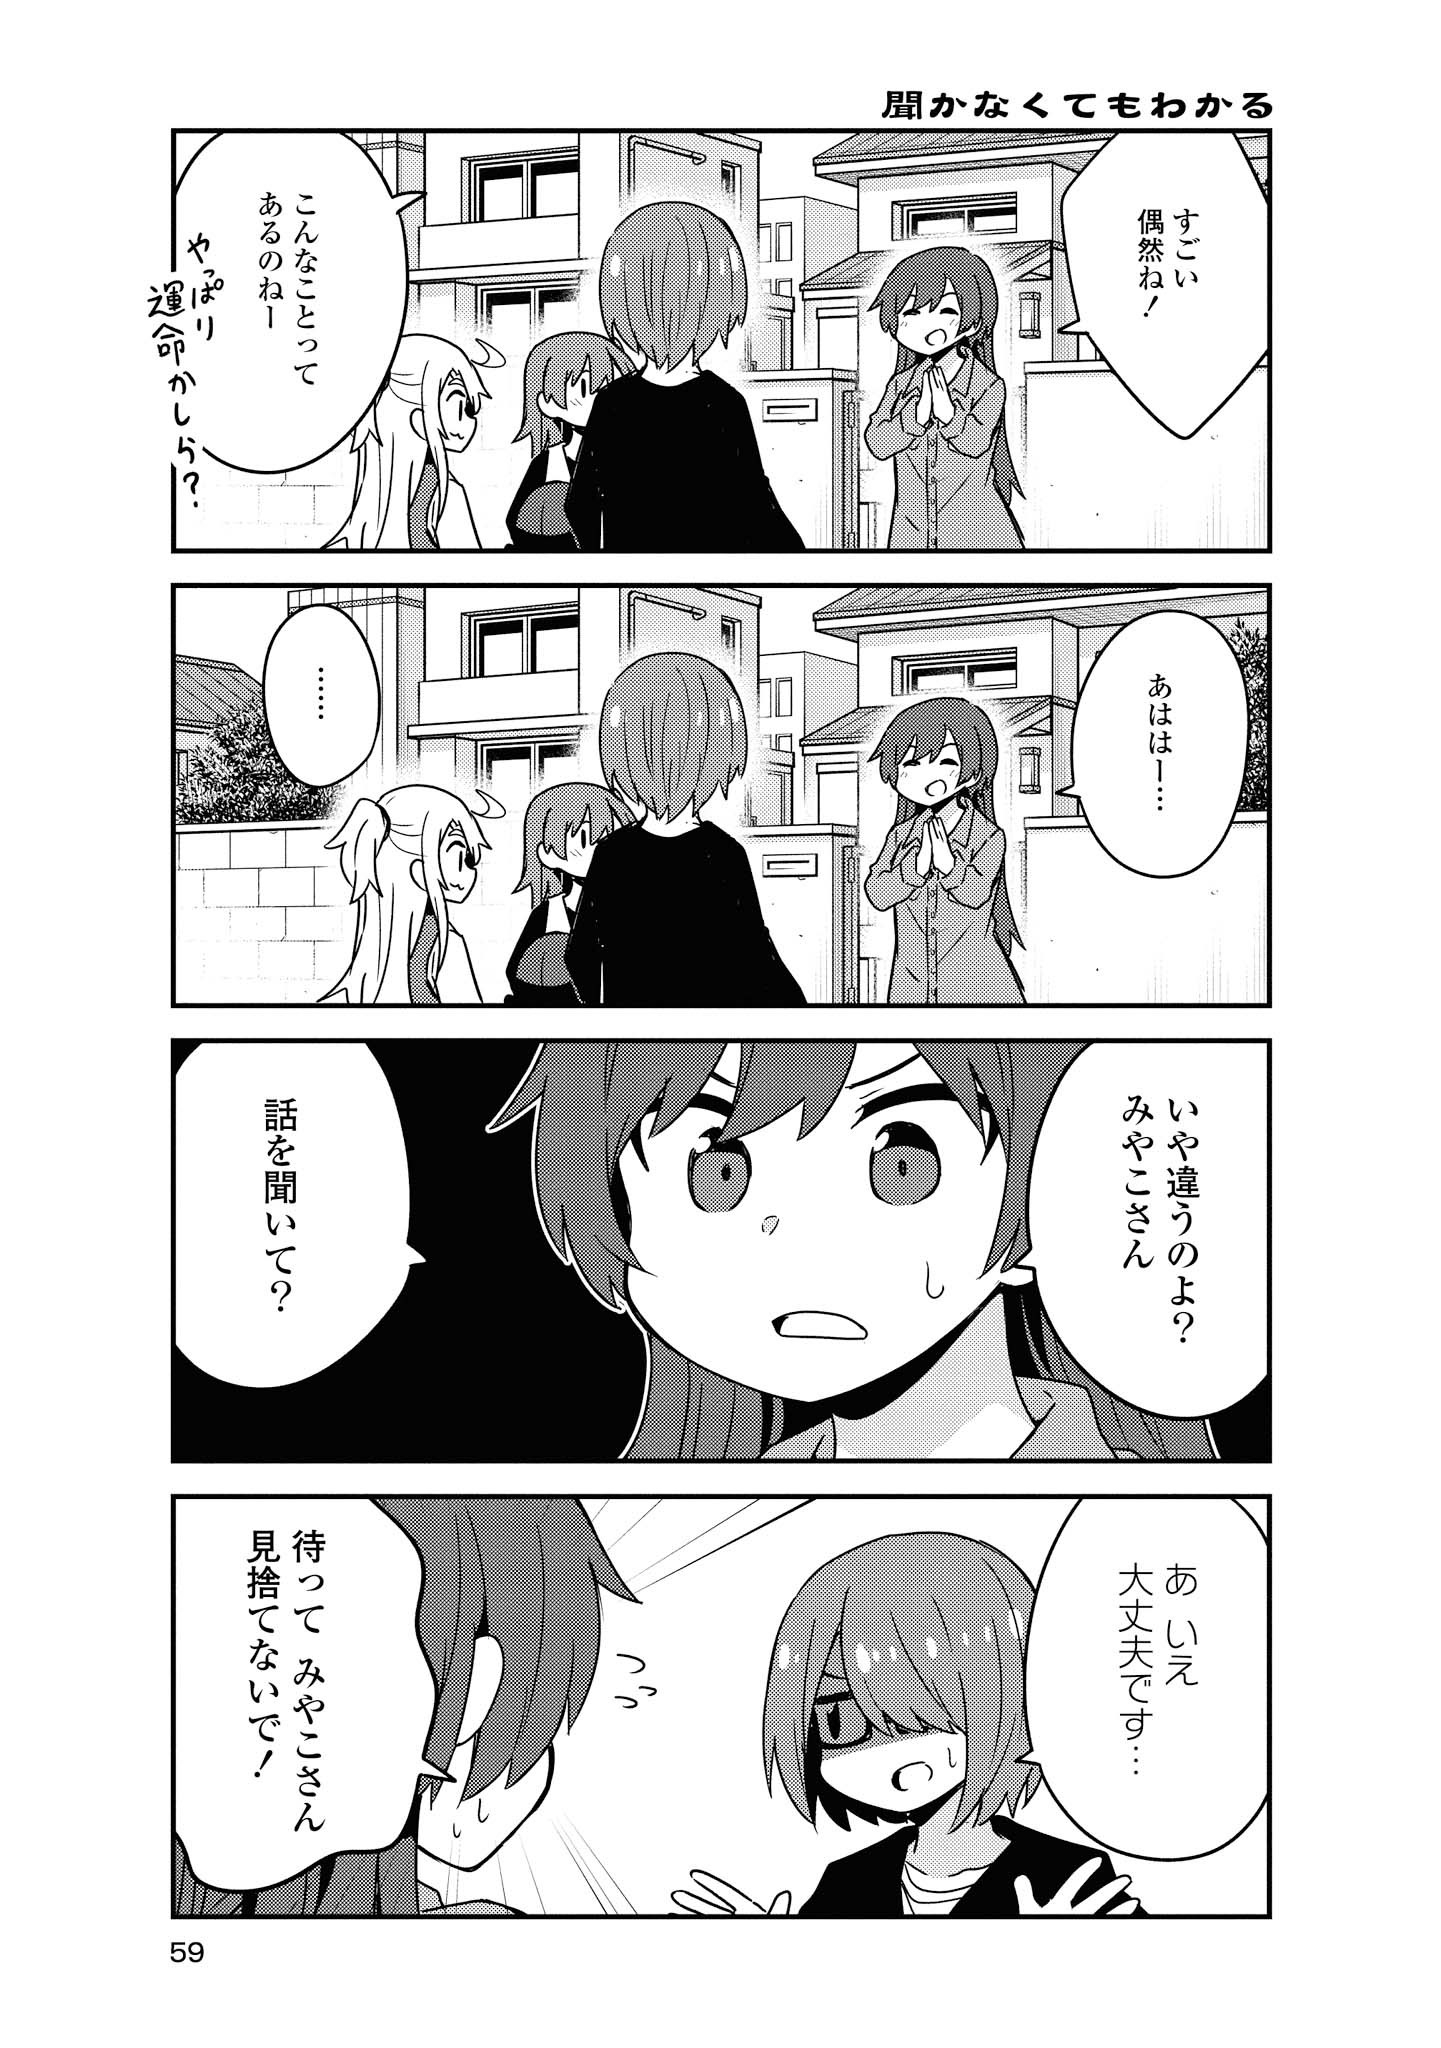 Wataten! An Angel Flew Down to Me 私に天使が舞い降りた！ 第55話 - Page 11